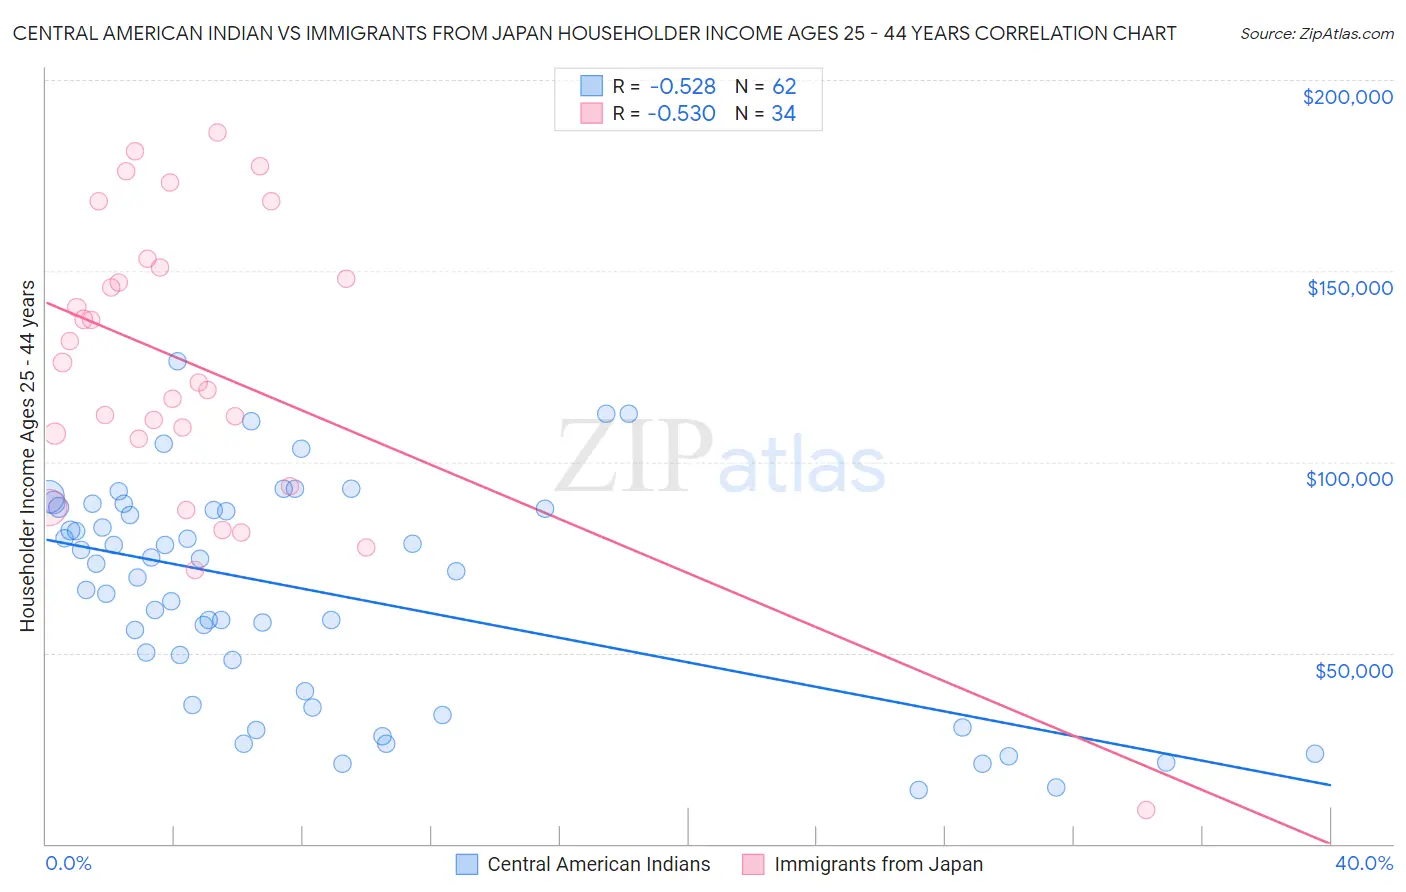 Central American Indian vs Immigrants from Japan Householder Income Ages 25 - 44 years